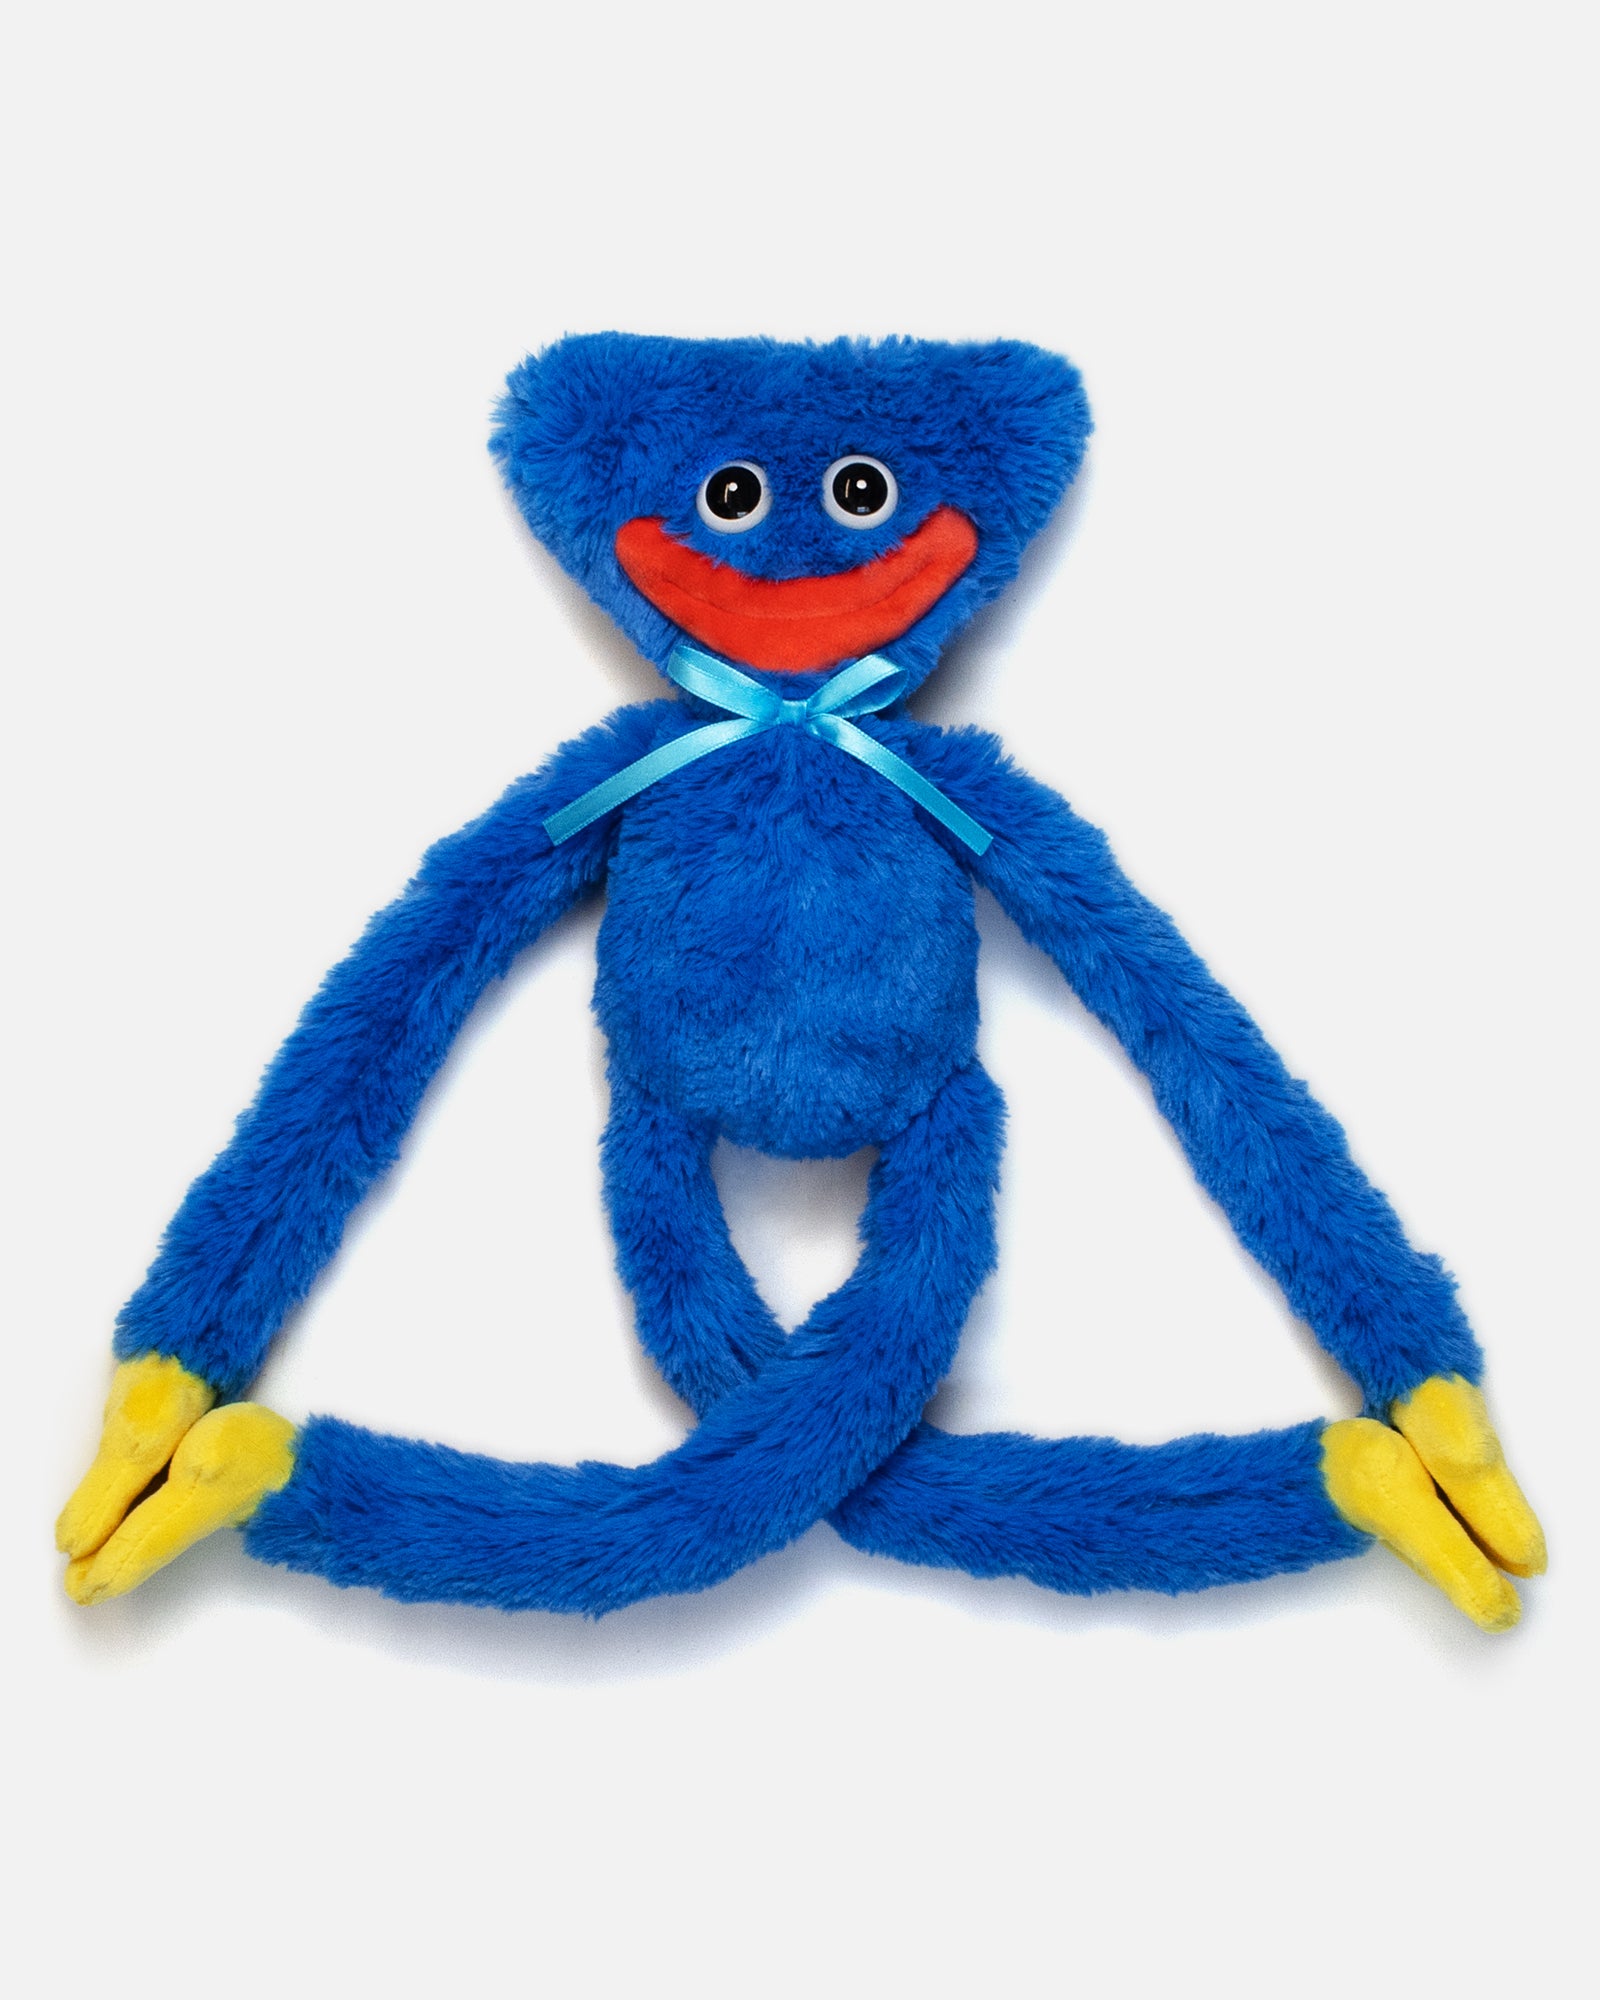 smiling huggy wuggy poppy playtime 19" plush front. hands and feet velcro together.